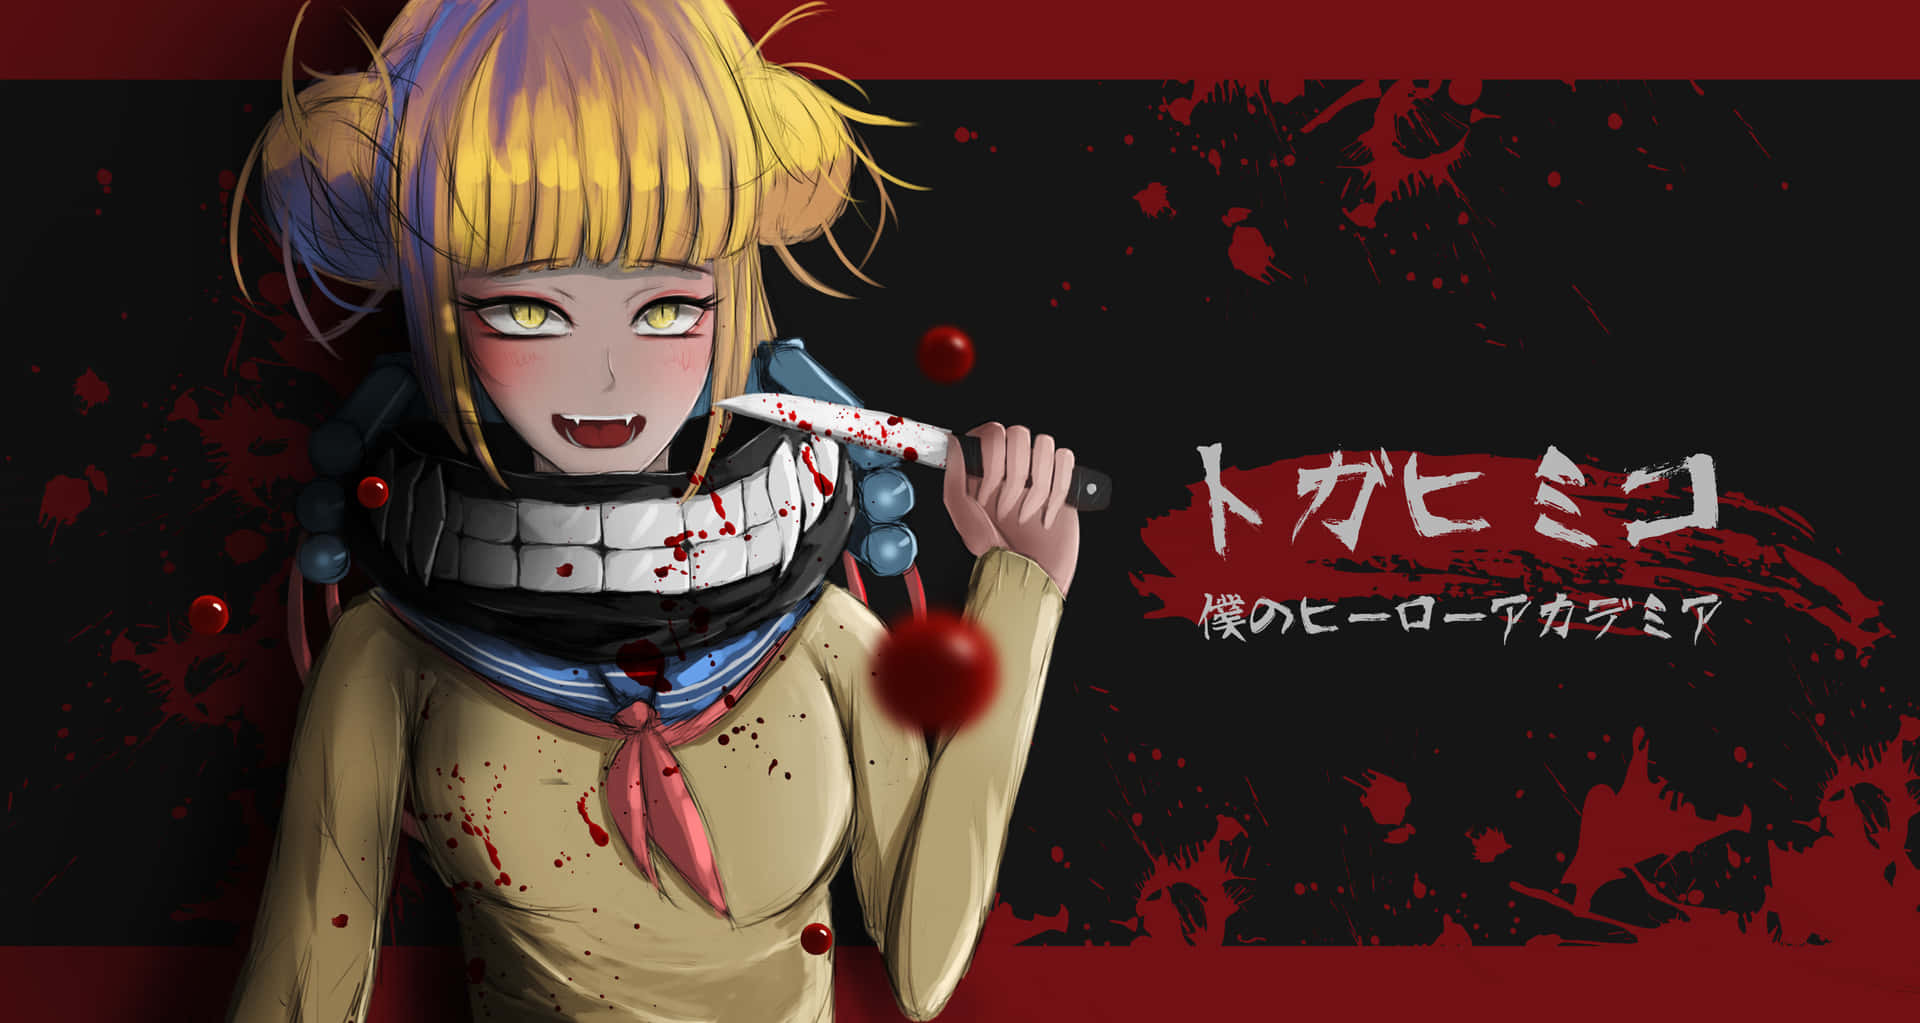 Himiko Toga Aesthetic With A Knife Wallpaper